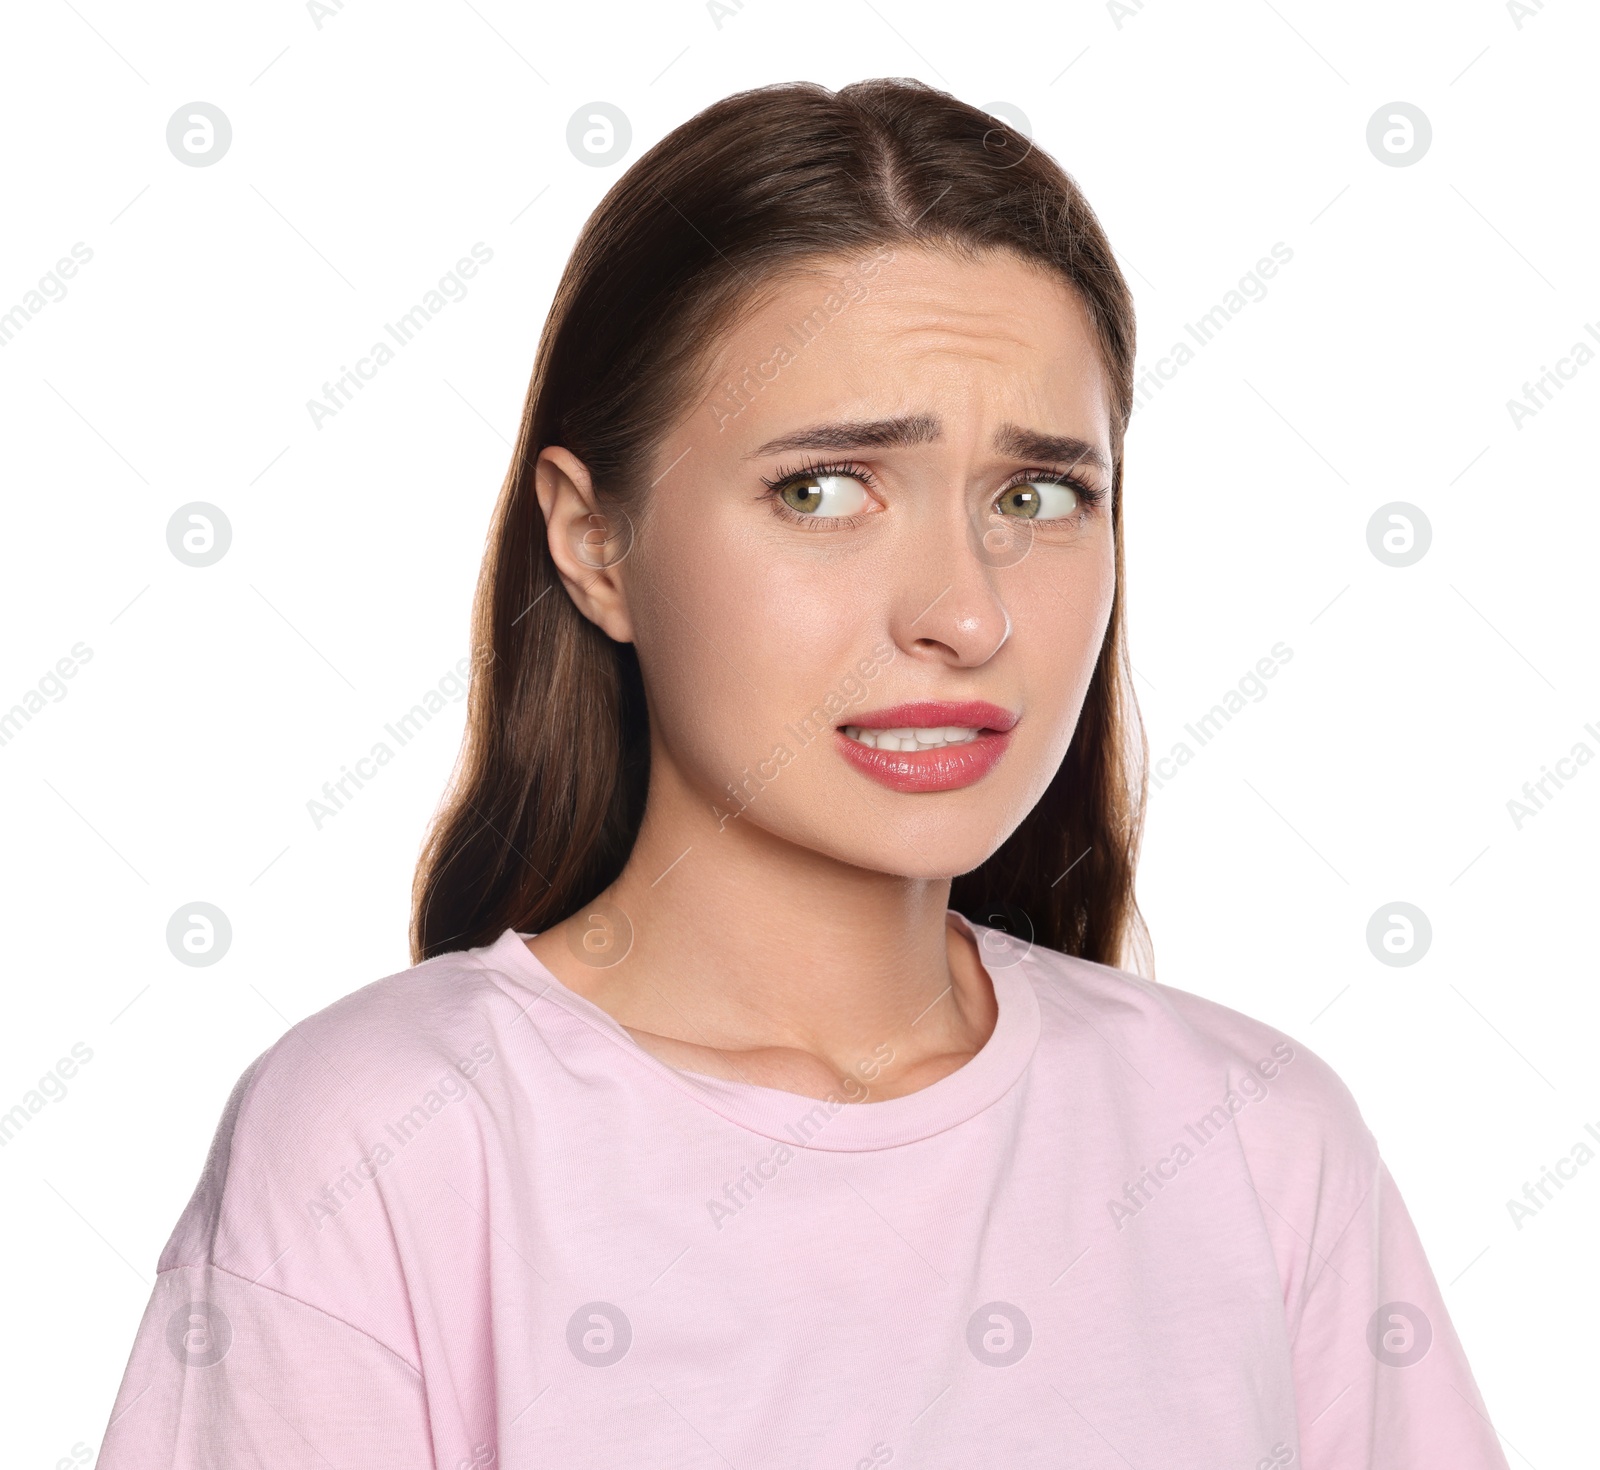 Photo of Embarrassed young woman in shirt on white background